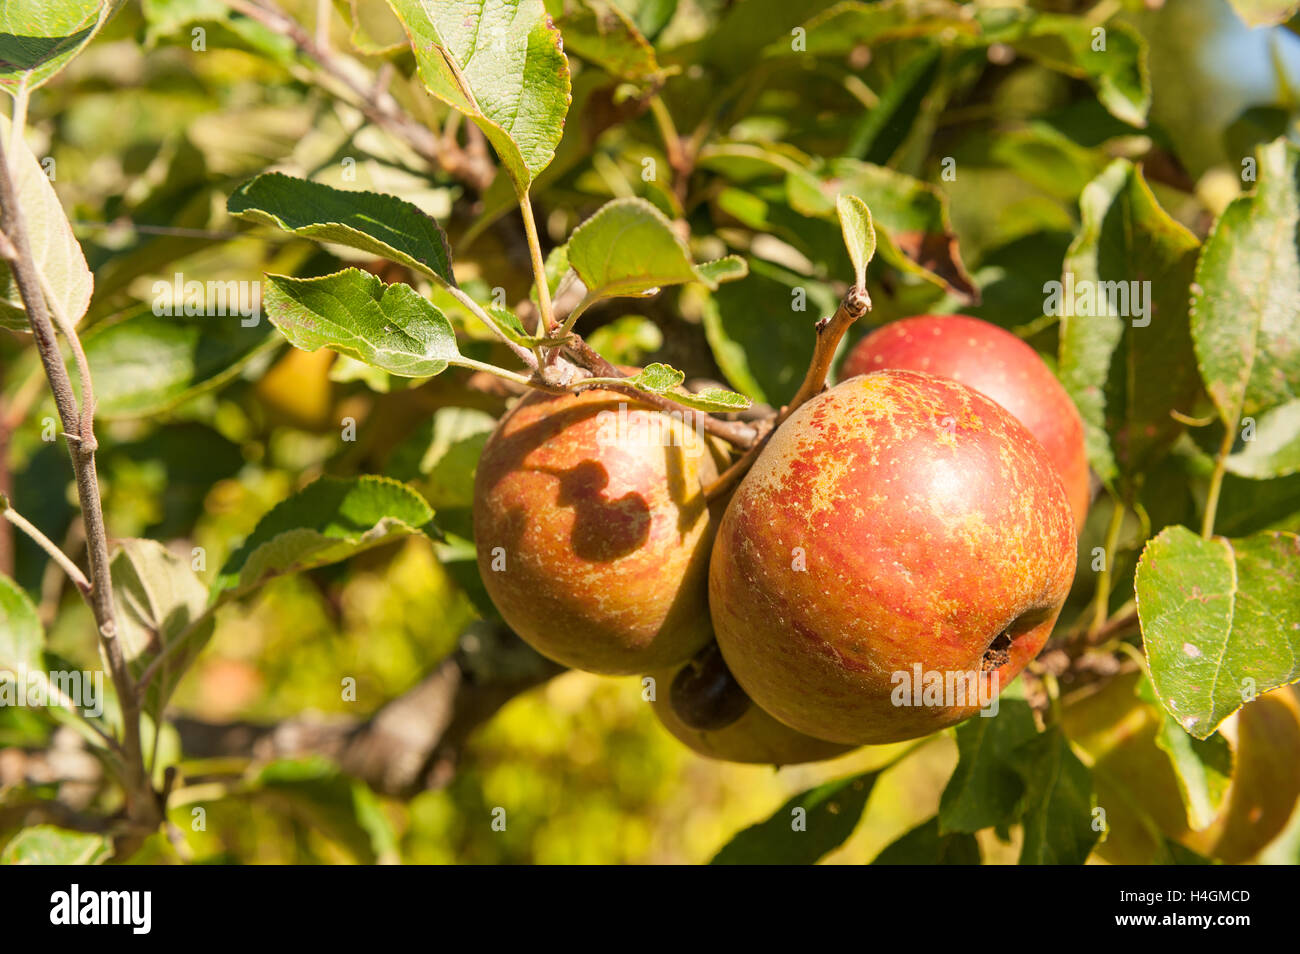 Bunch of eating apples cox's ripening in late summer sunshine Stock Photo